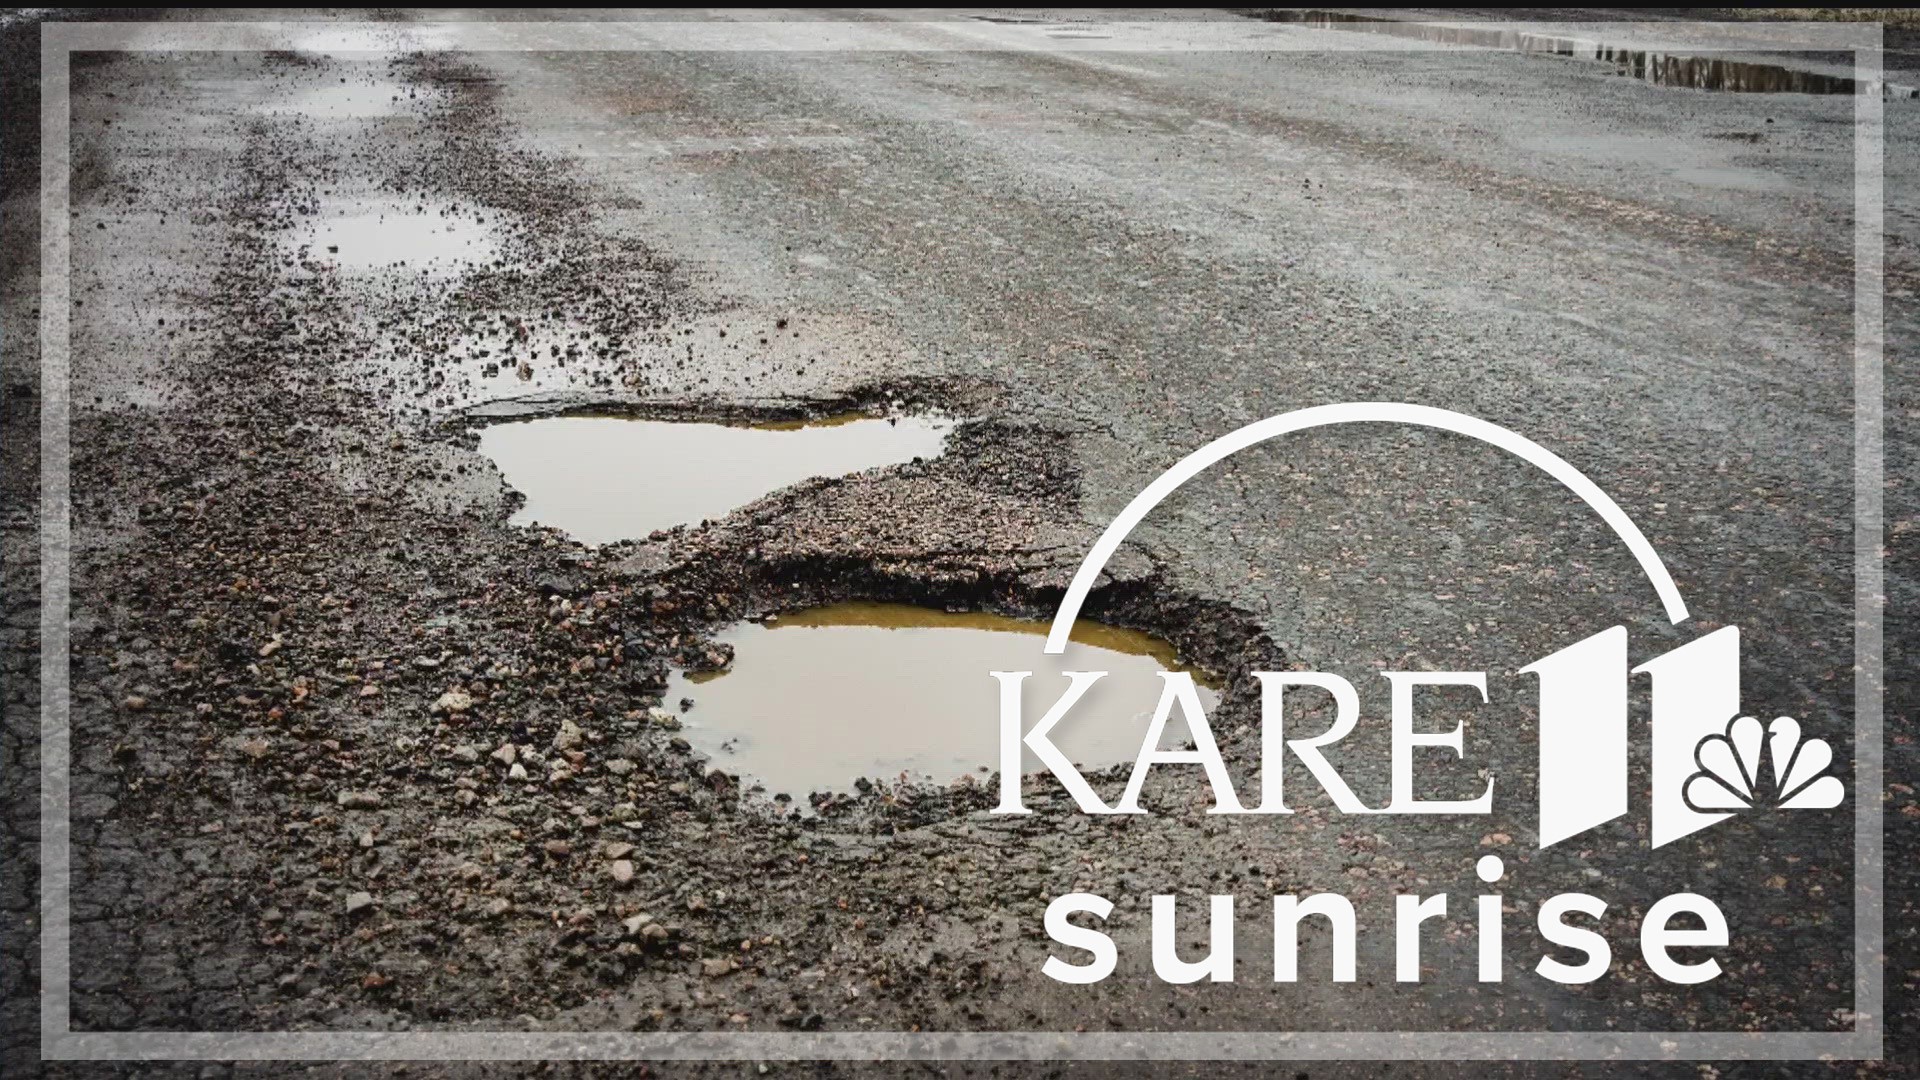 City leaders say overtime, weekend hours and up to $1 million in funds are all in the arsenal when it comes to repairing the holes winter has left in the roads.